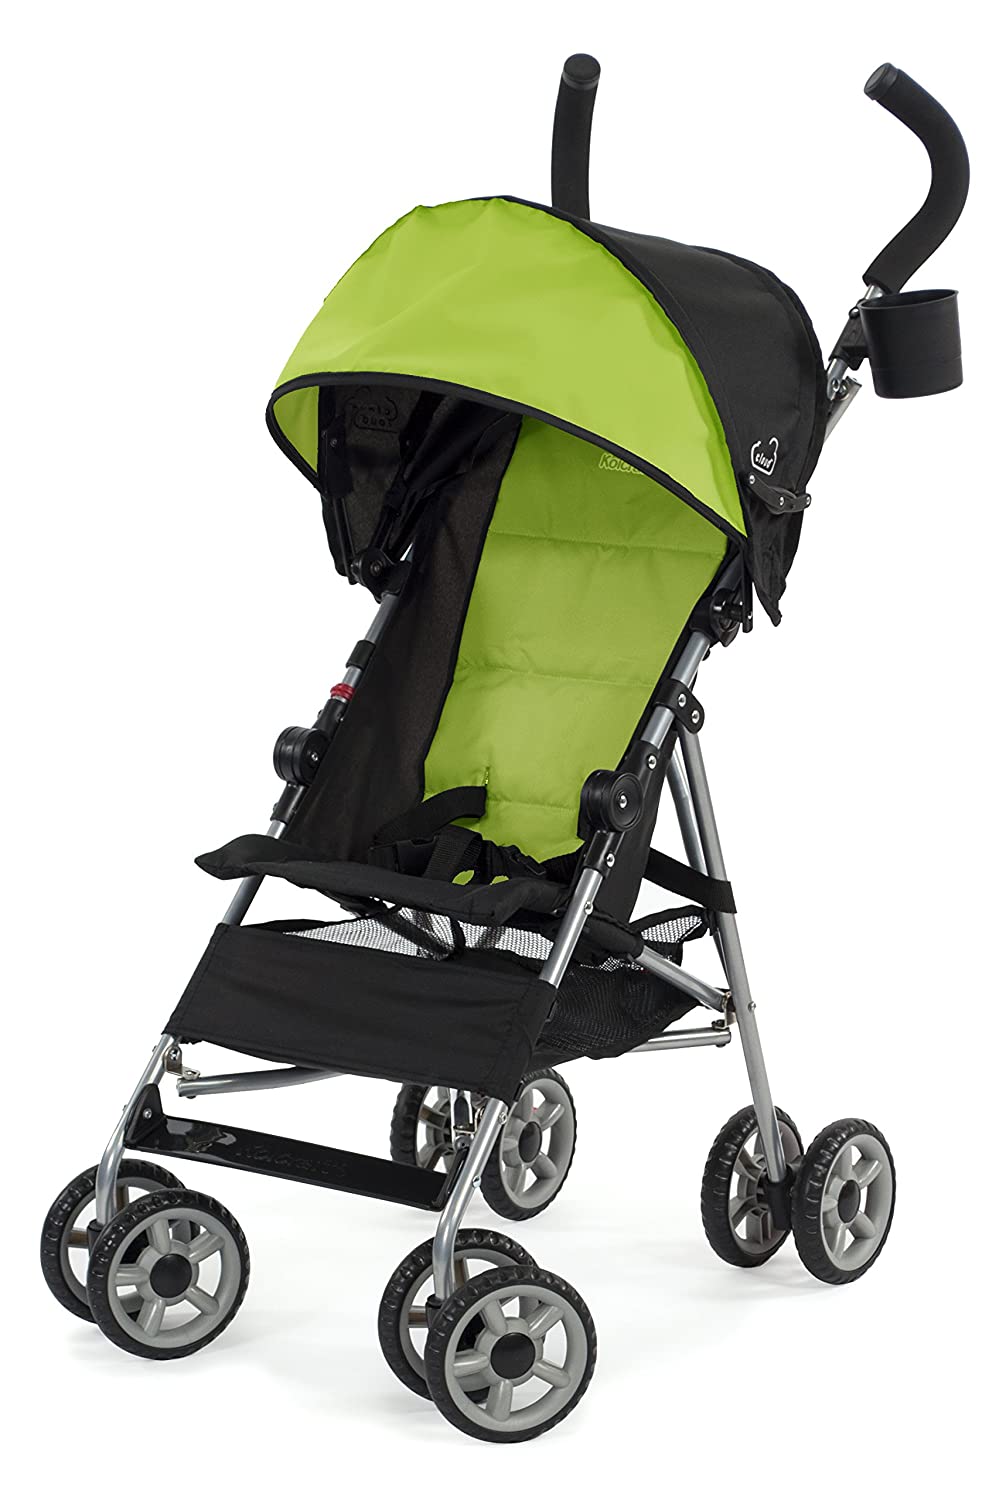 10 Best Umbrella Strollers for Toddler Reviews of 2023 1